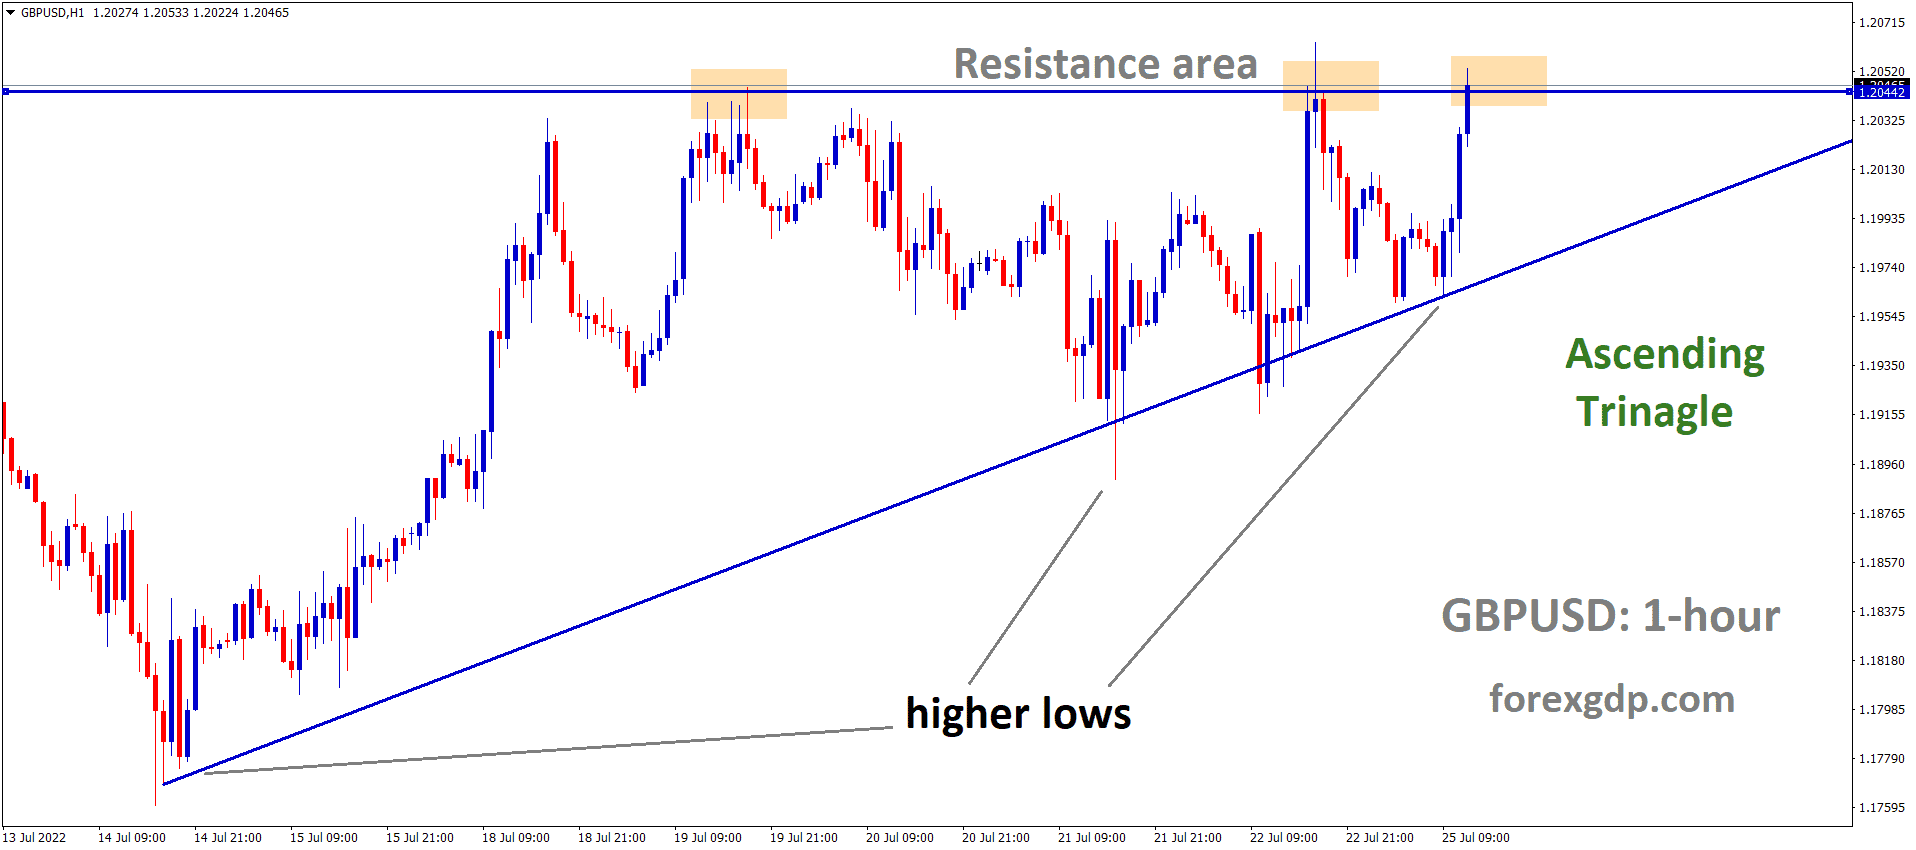 GBPUSD is moving in an Ascending triangle pattern and the Market has reached the Horizontal resistance area of the Pattern